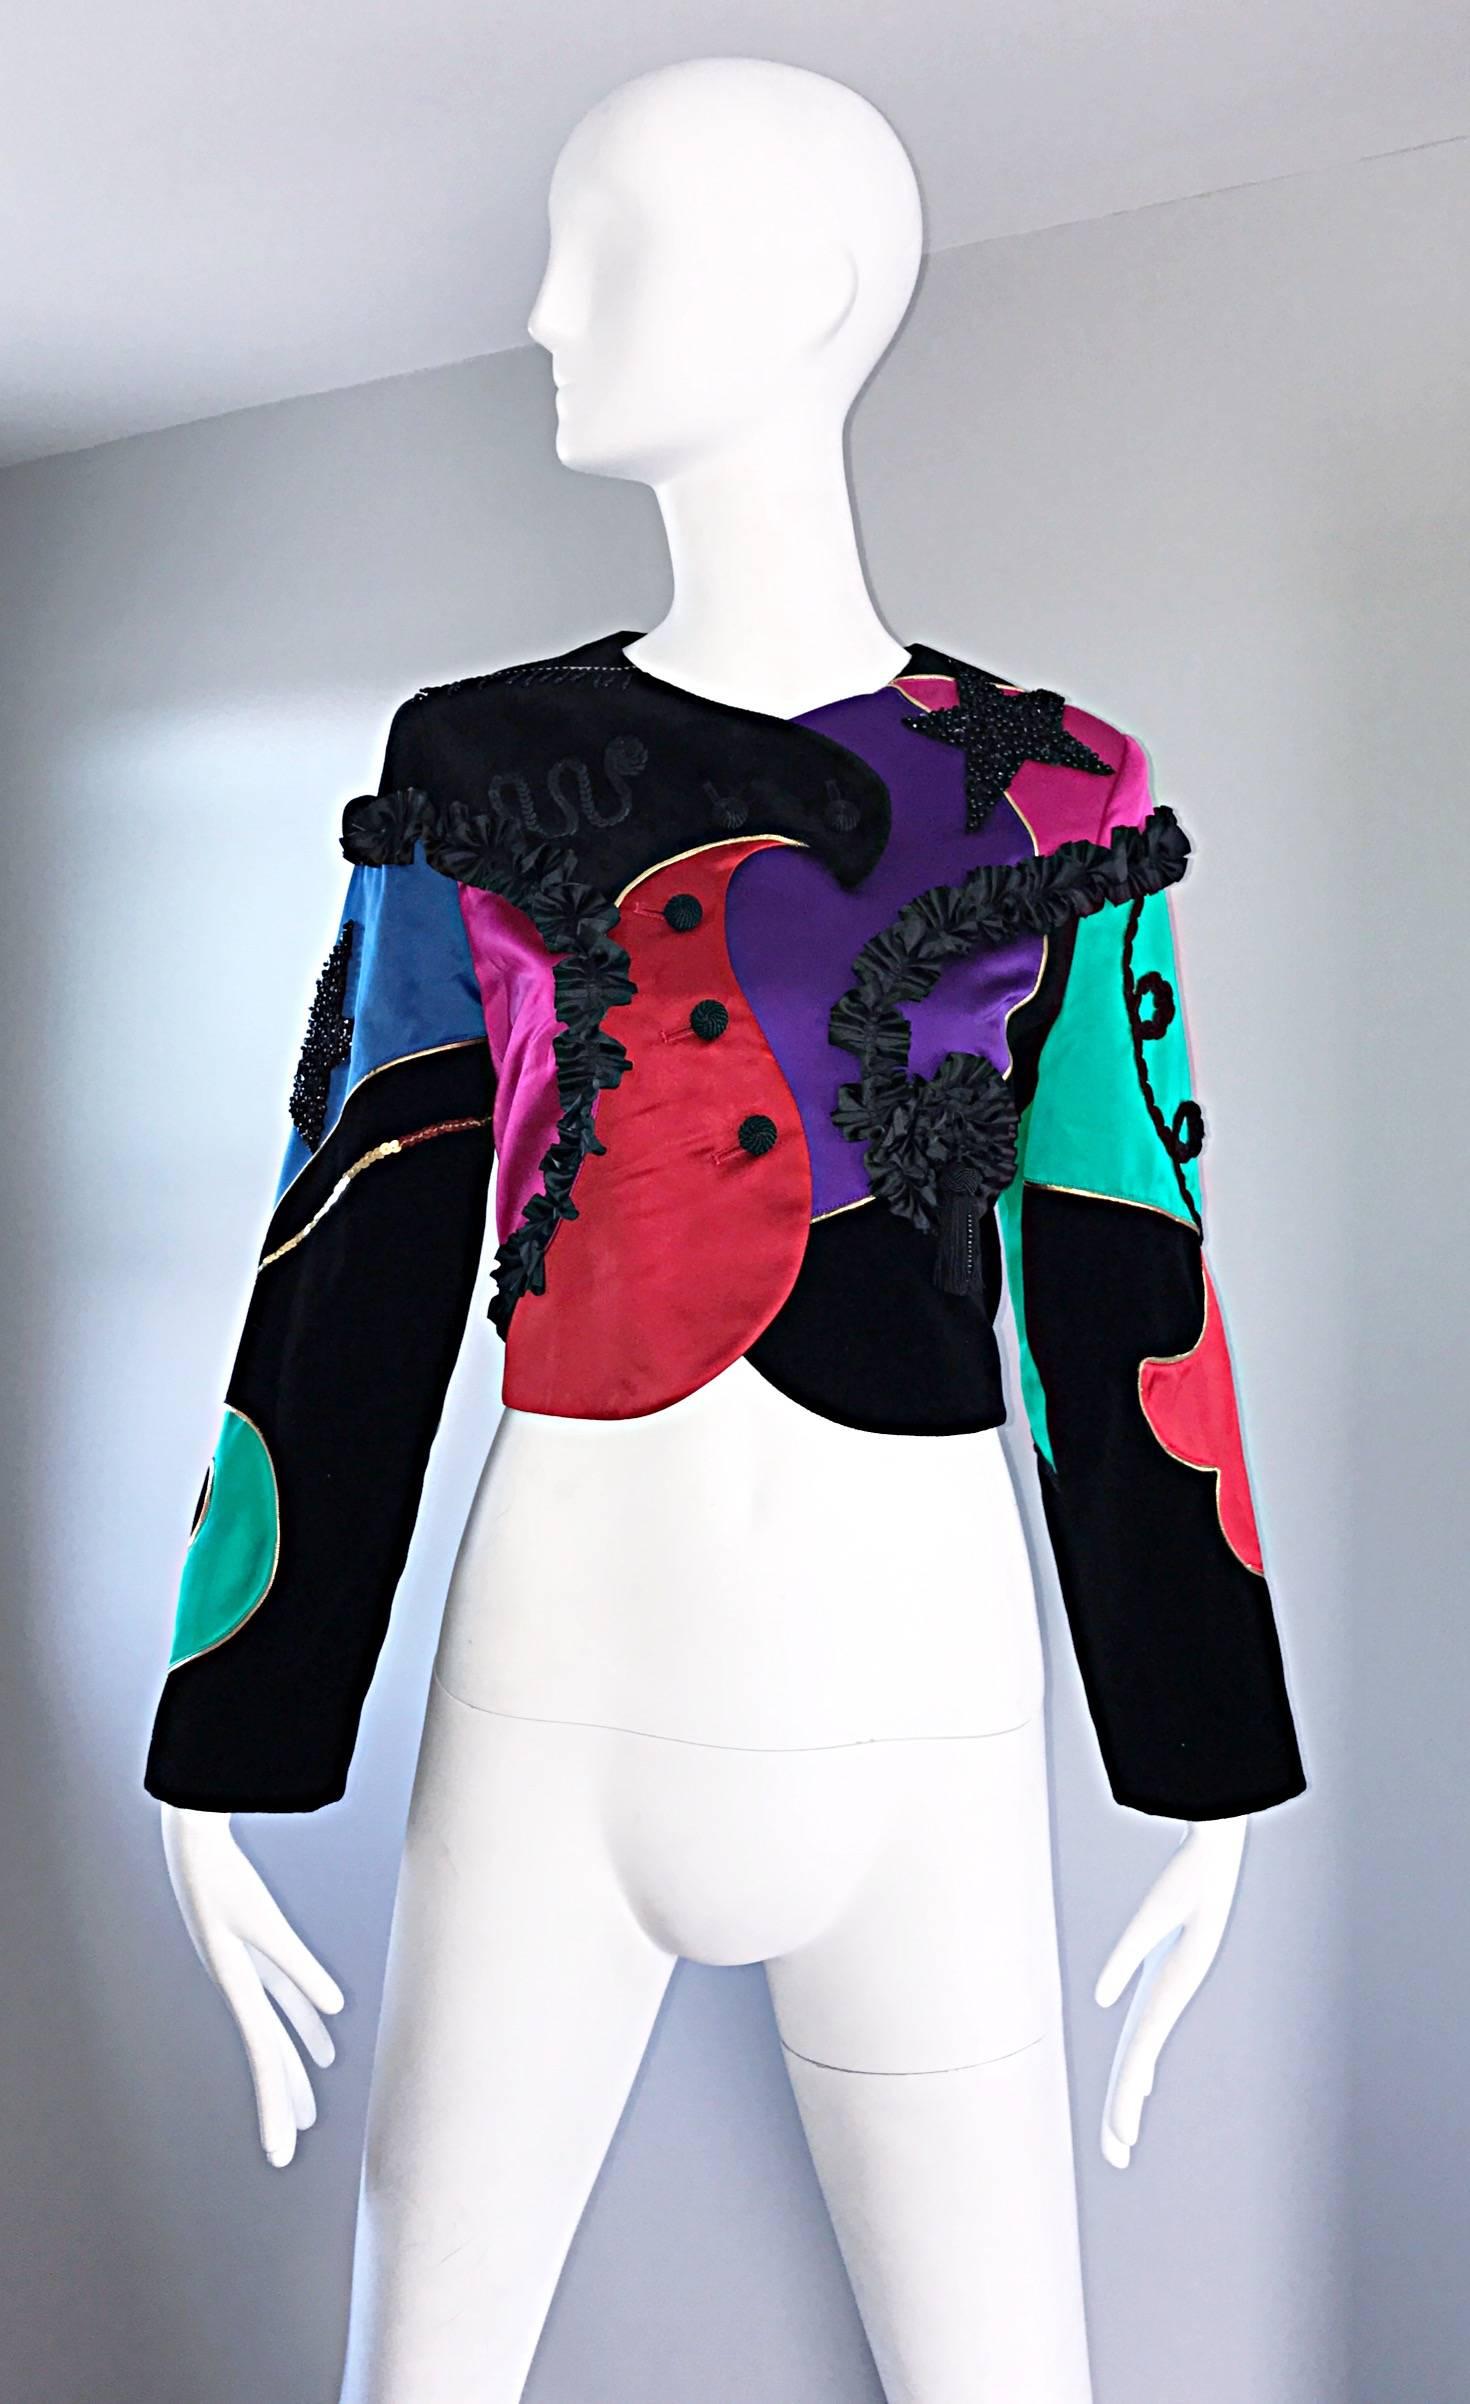 Rare and insanely chic vintage LOUIS FERAUD cropped matador style jacket! Super soft silk and velvet composition, with intricate embroiderery, sequins and beads throughout. Asymmetrically lined buttons up the front. Couture quality, with an amazing